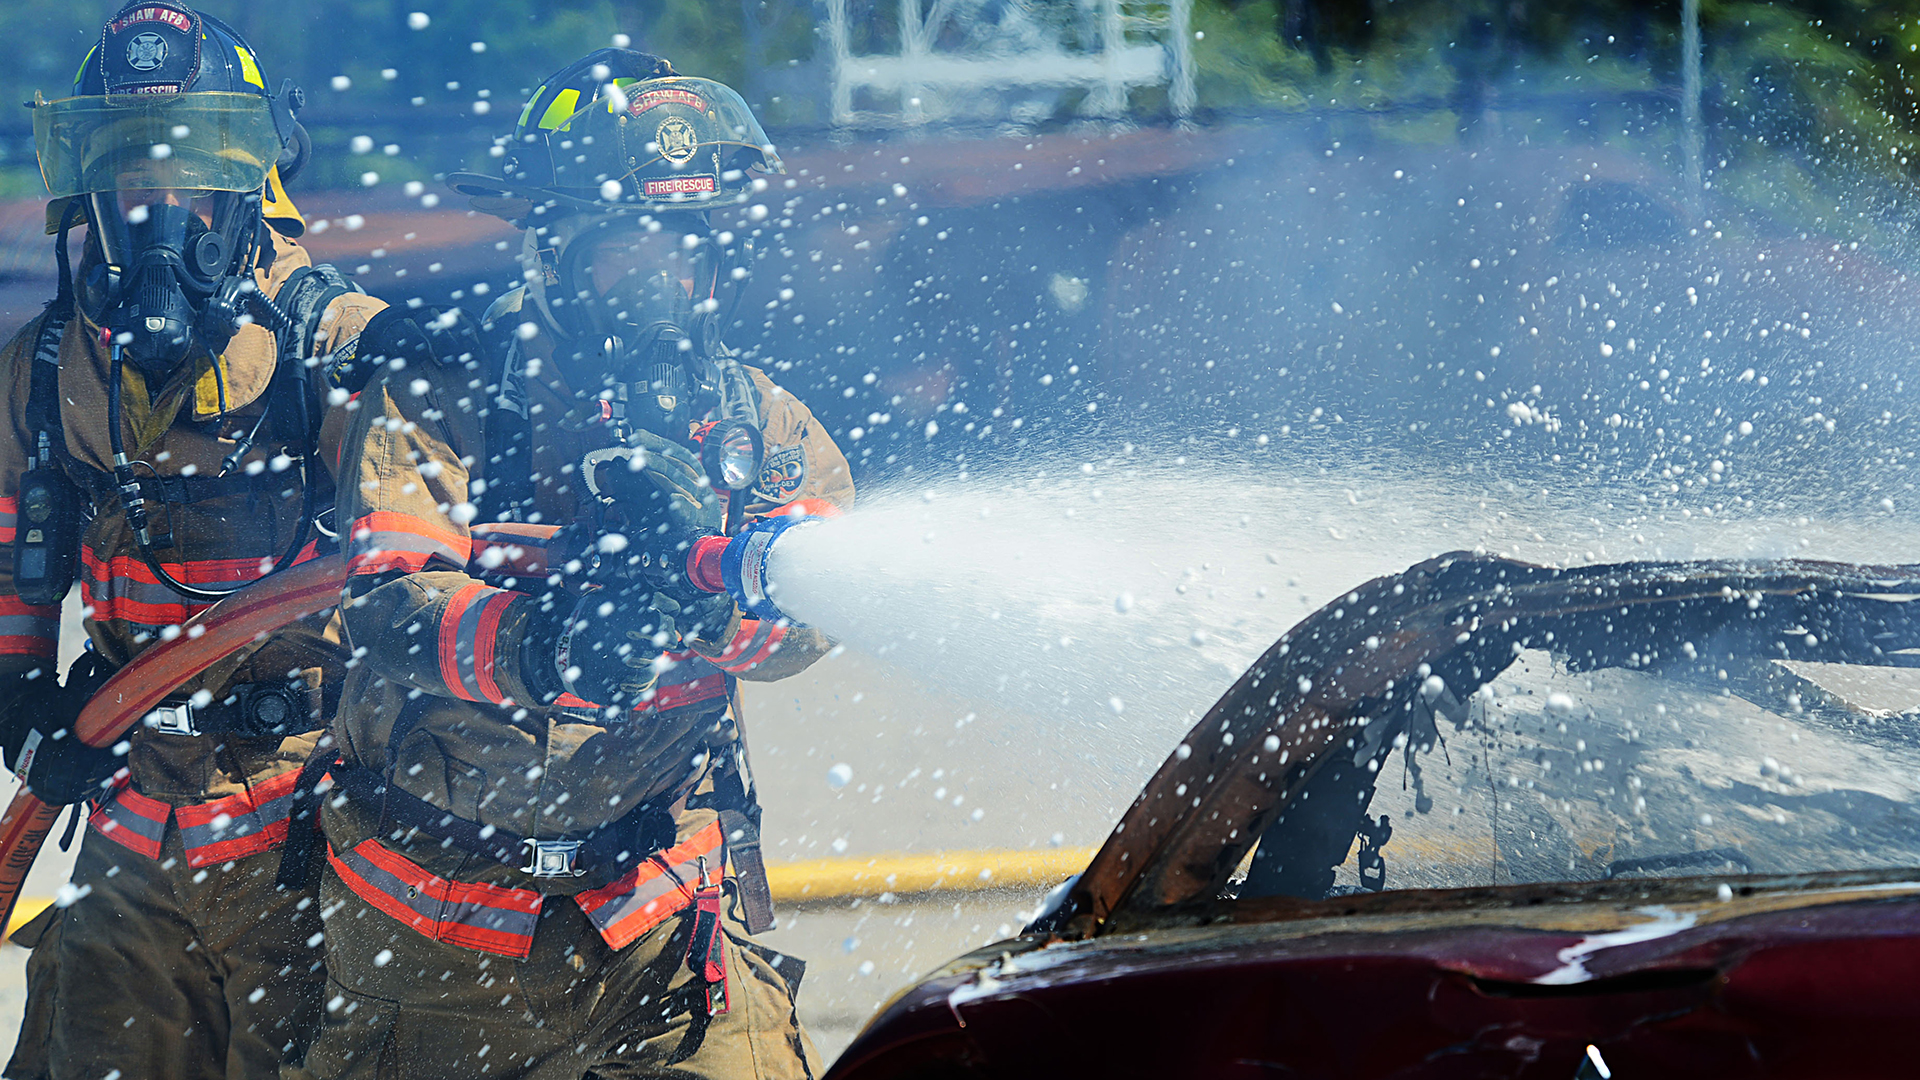 Two firefighters in full gear spray foam out of a hose onto a burned vehicle